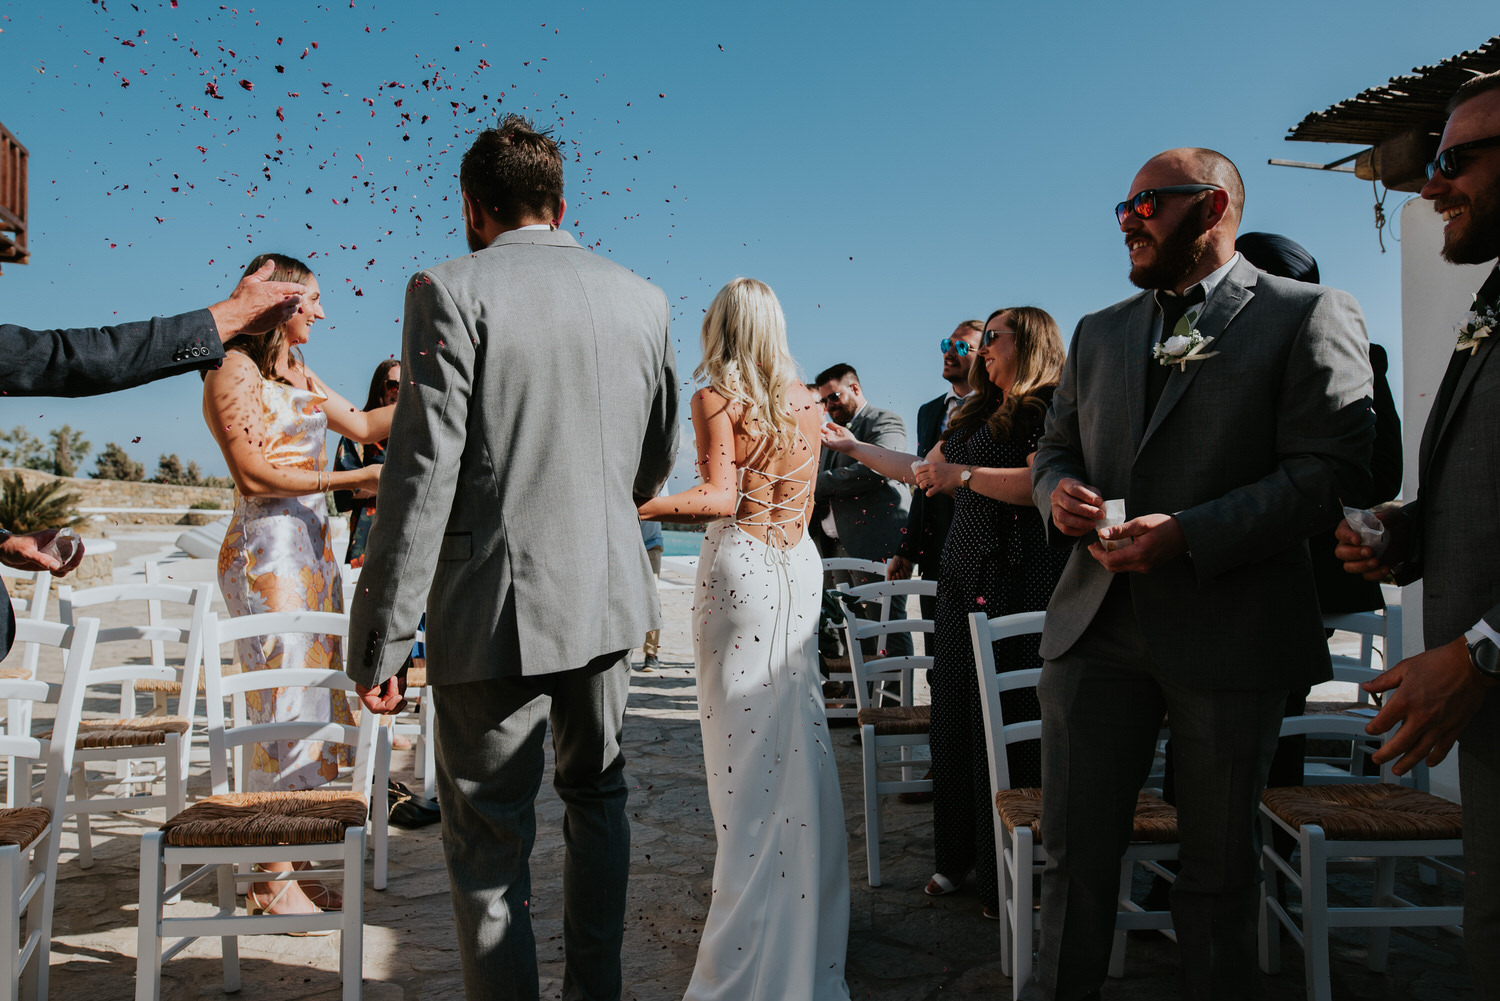 Mykonos wedding photographer: bride and groom shot from behind exiting the aisle holding hands showered in dry petals.